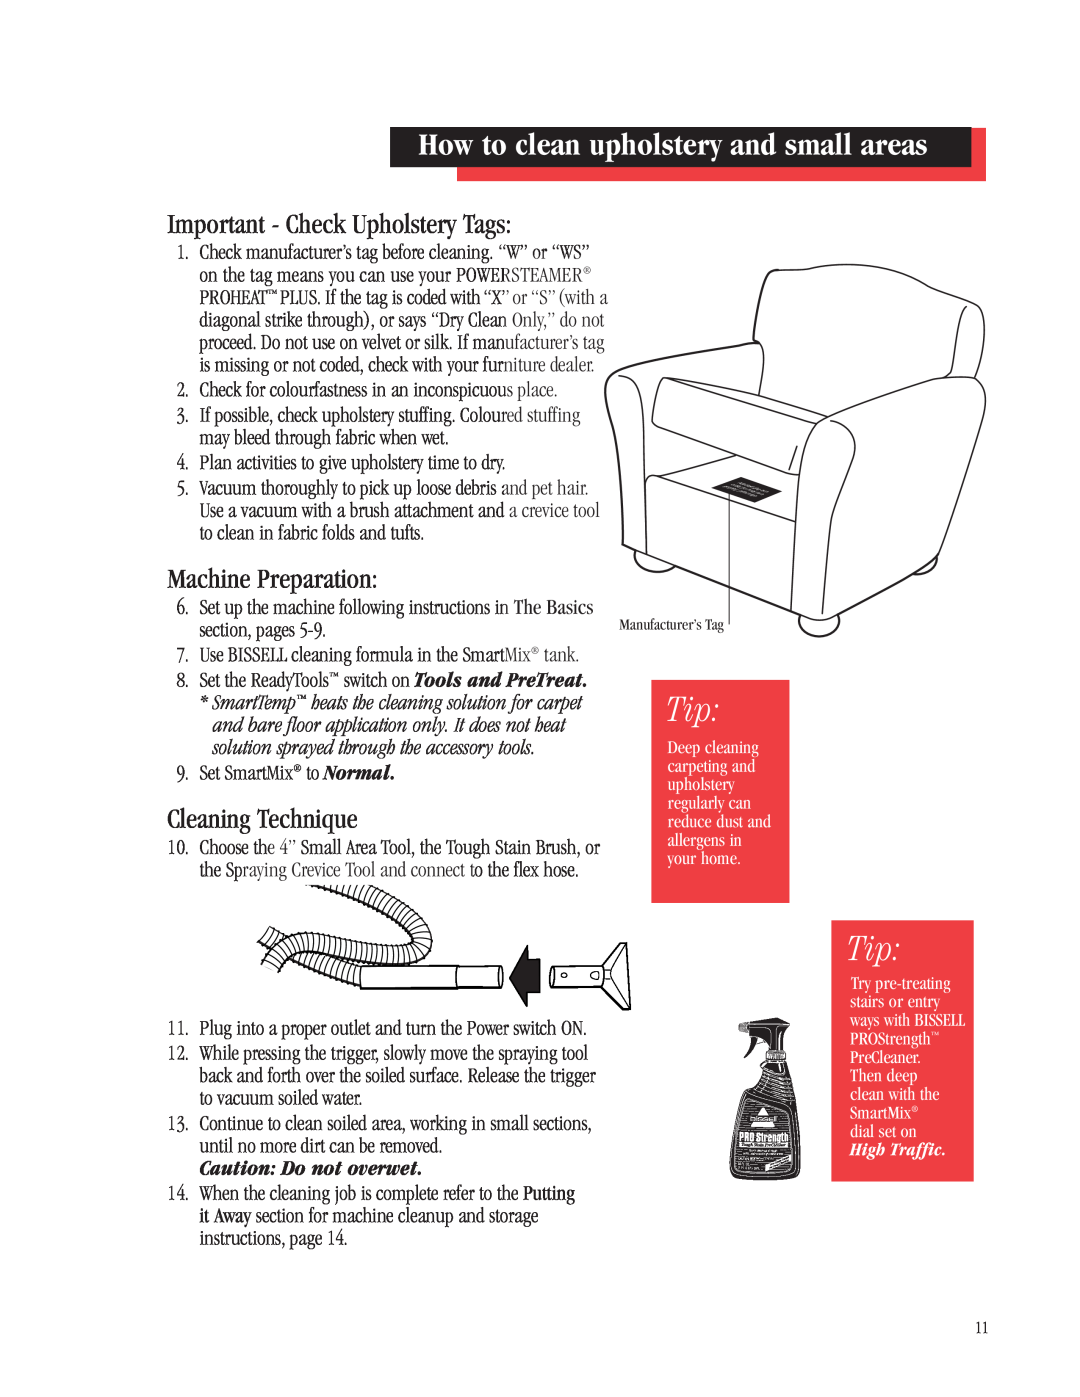 Bissell 1698 warranty How to clean upholstery and small areas, Important - Check Upholstery Tags, Cleaning Technique 